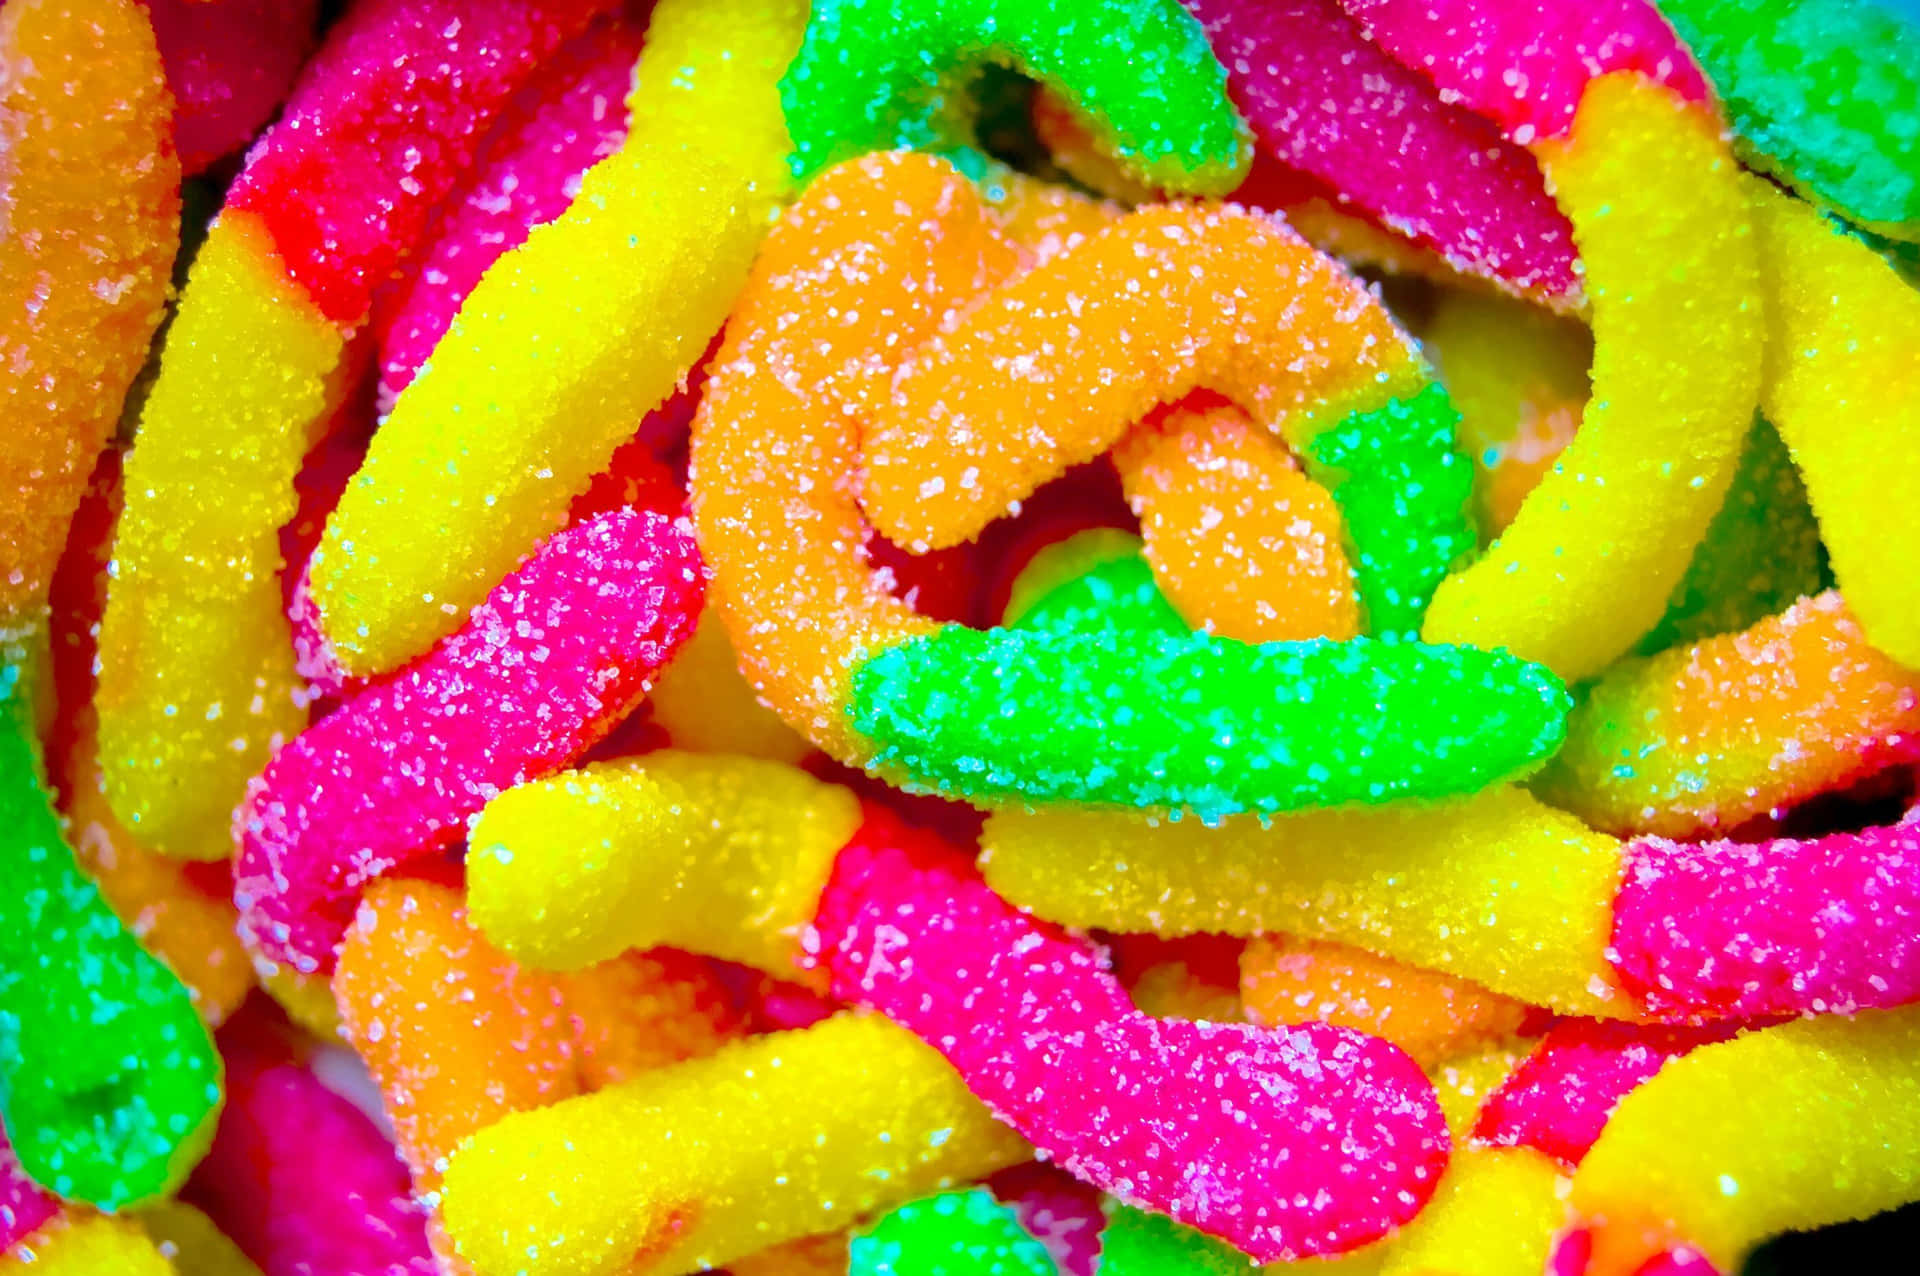 Colorful and Delicious! #CandyVibes